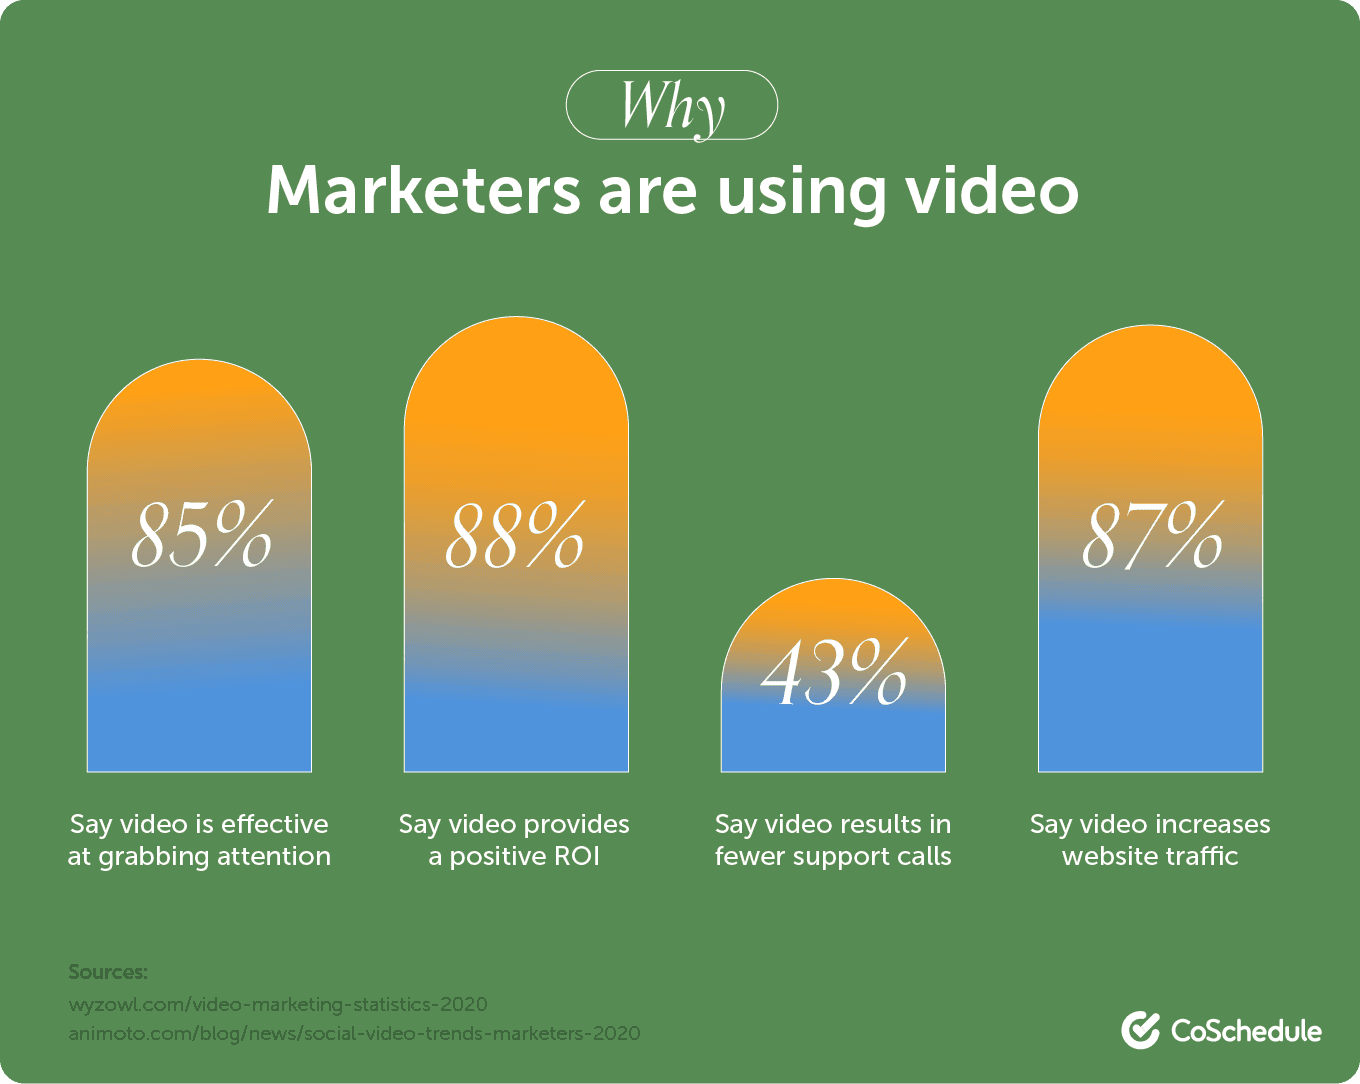 bar graph illustration showing what marketers are saying about why they use video in their efforts